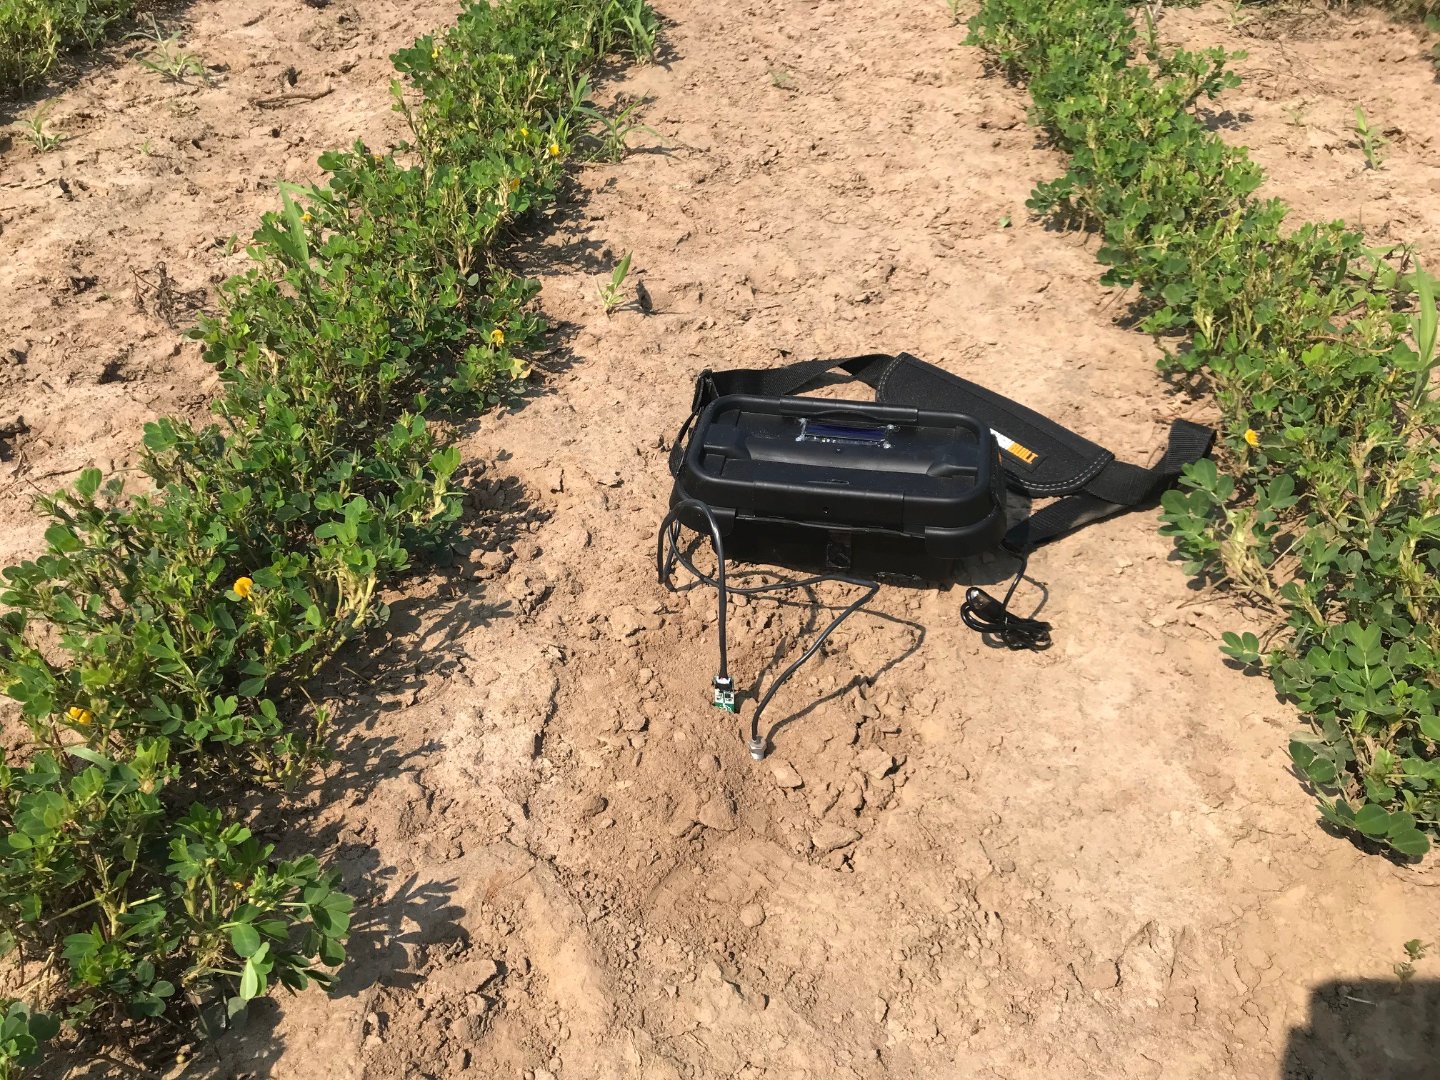 A portable integrated prototype sensing system measures and displays temperature and relative humidity of air, moisture content and temperature of soil.